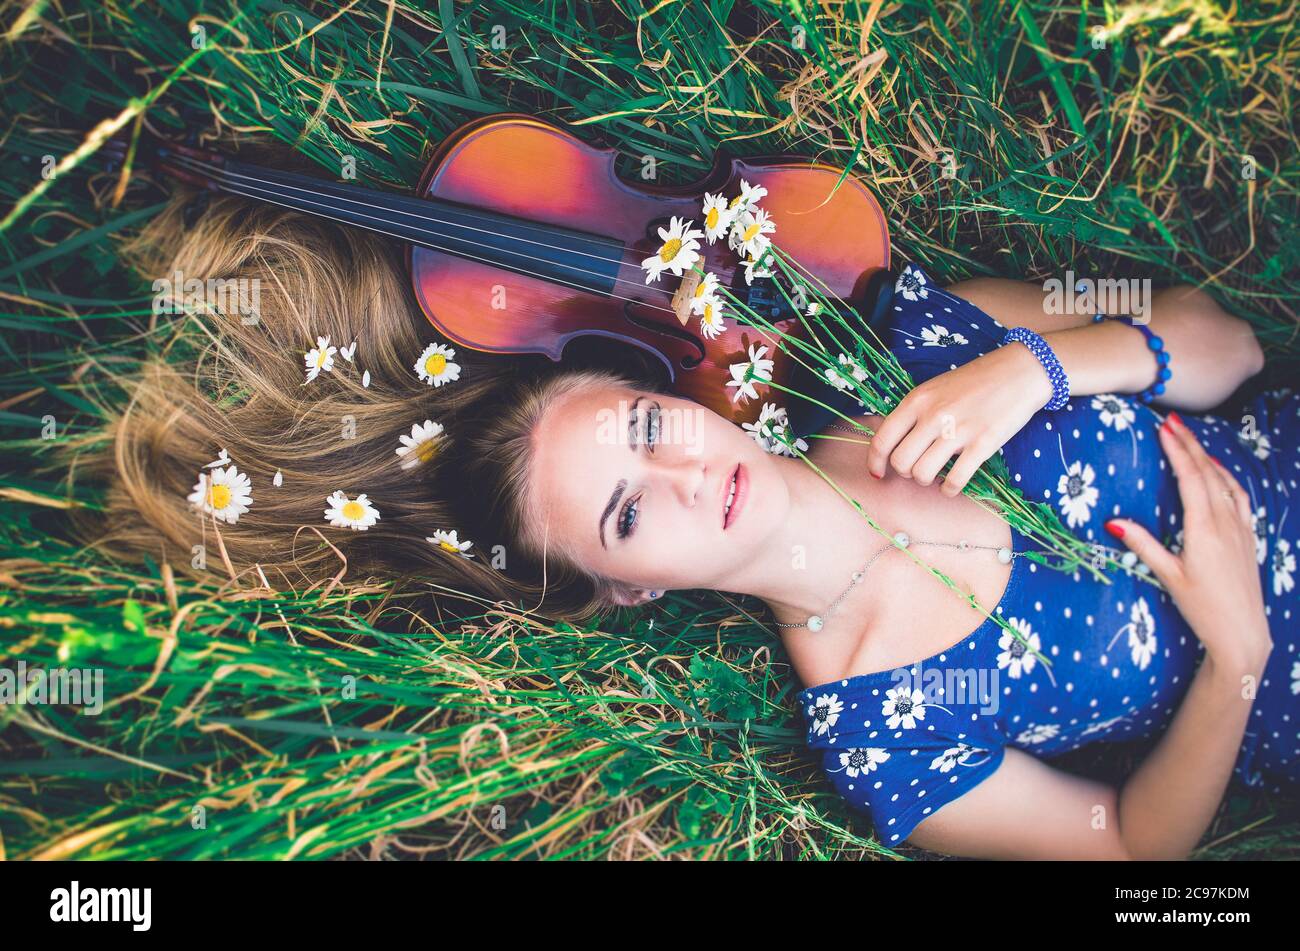 Young slim fair-skinned girl blonde beautiful lies in tall grass. Top view. Girl in a blue short tight dress with a print of daisies. A bouquet and lo Stock Photo